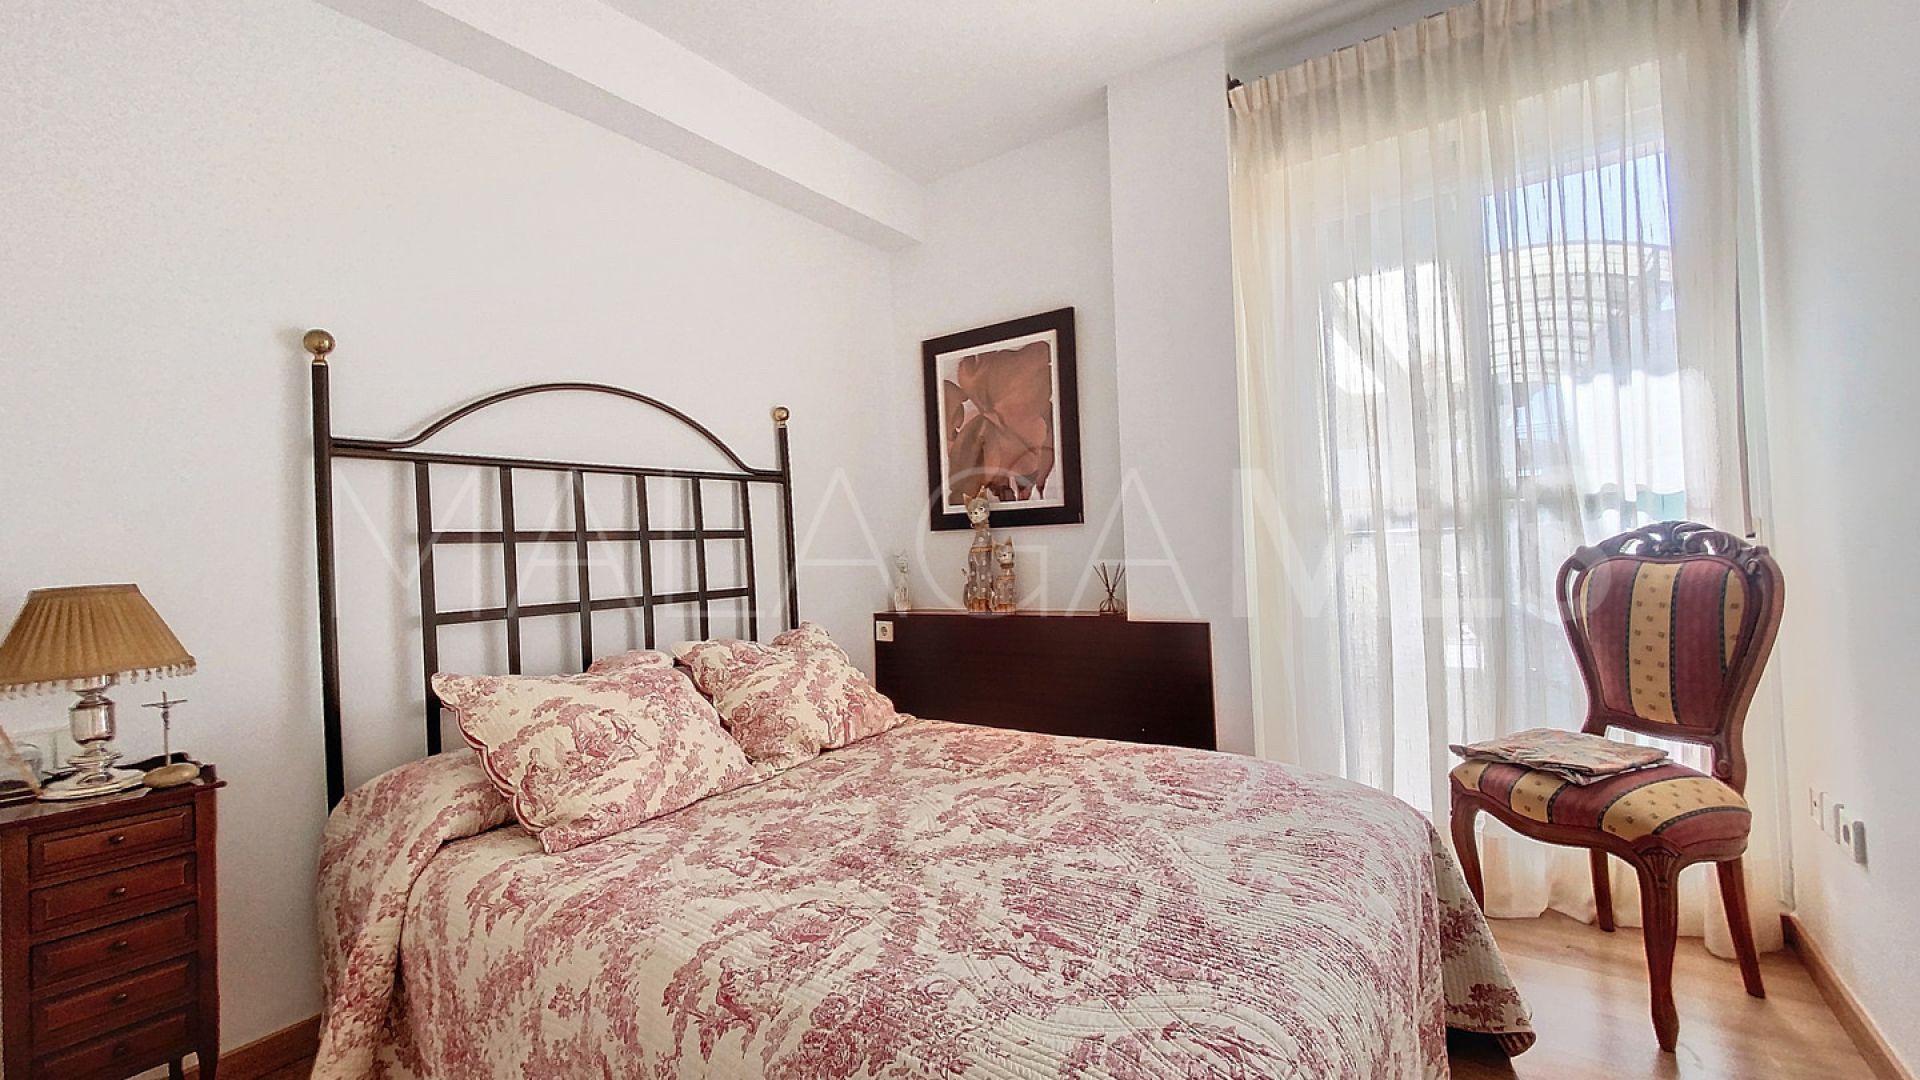 For sale Lorcrimar apartment with 3 bedrooms